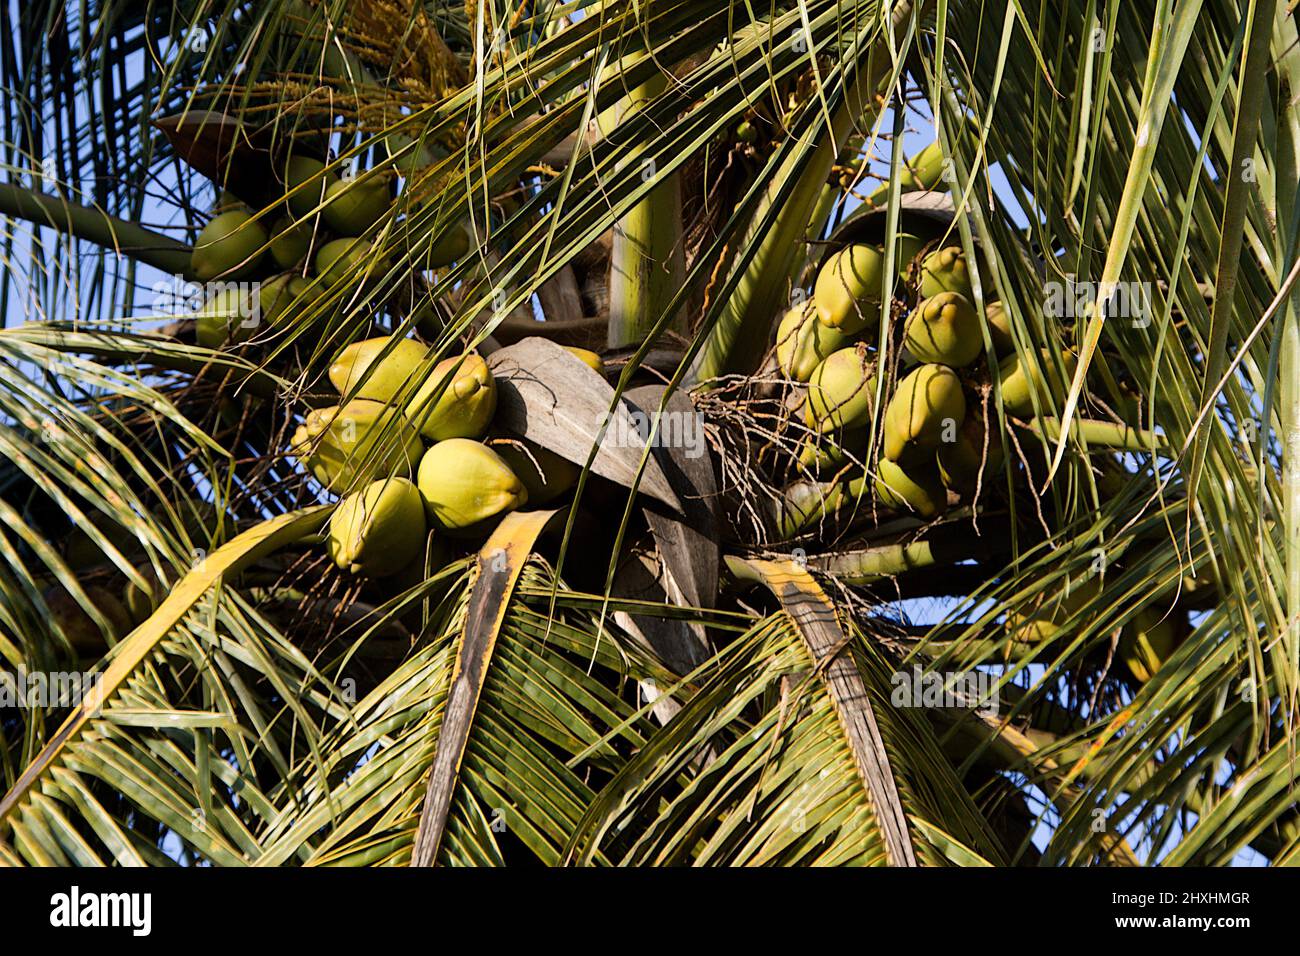 Closer view of top of coconut tree showing huge leaves laden with plenty of crop Stock Photo